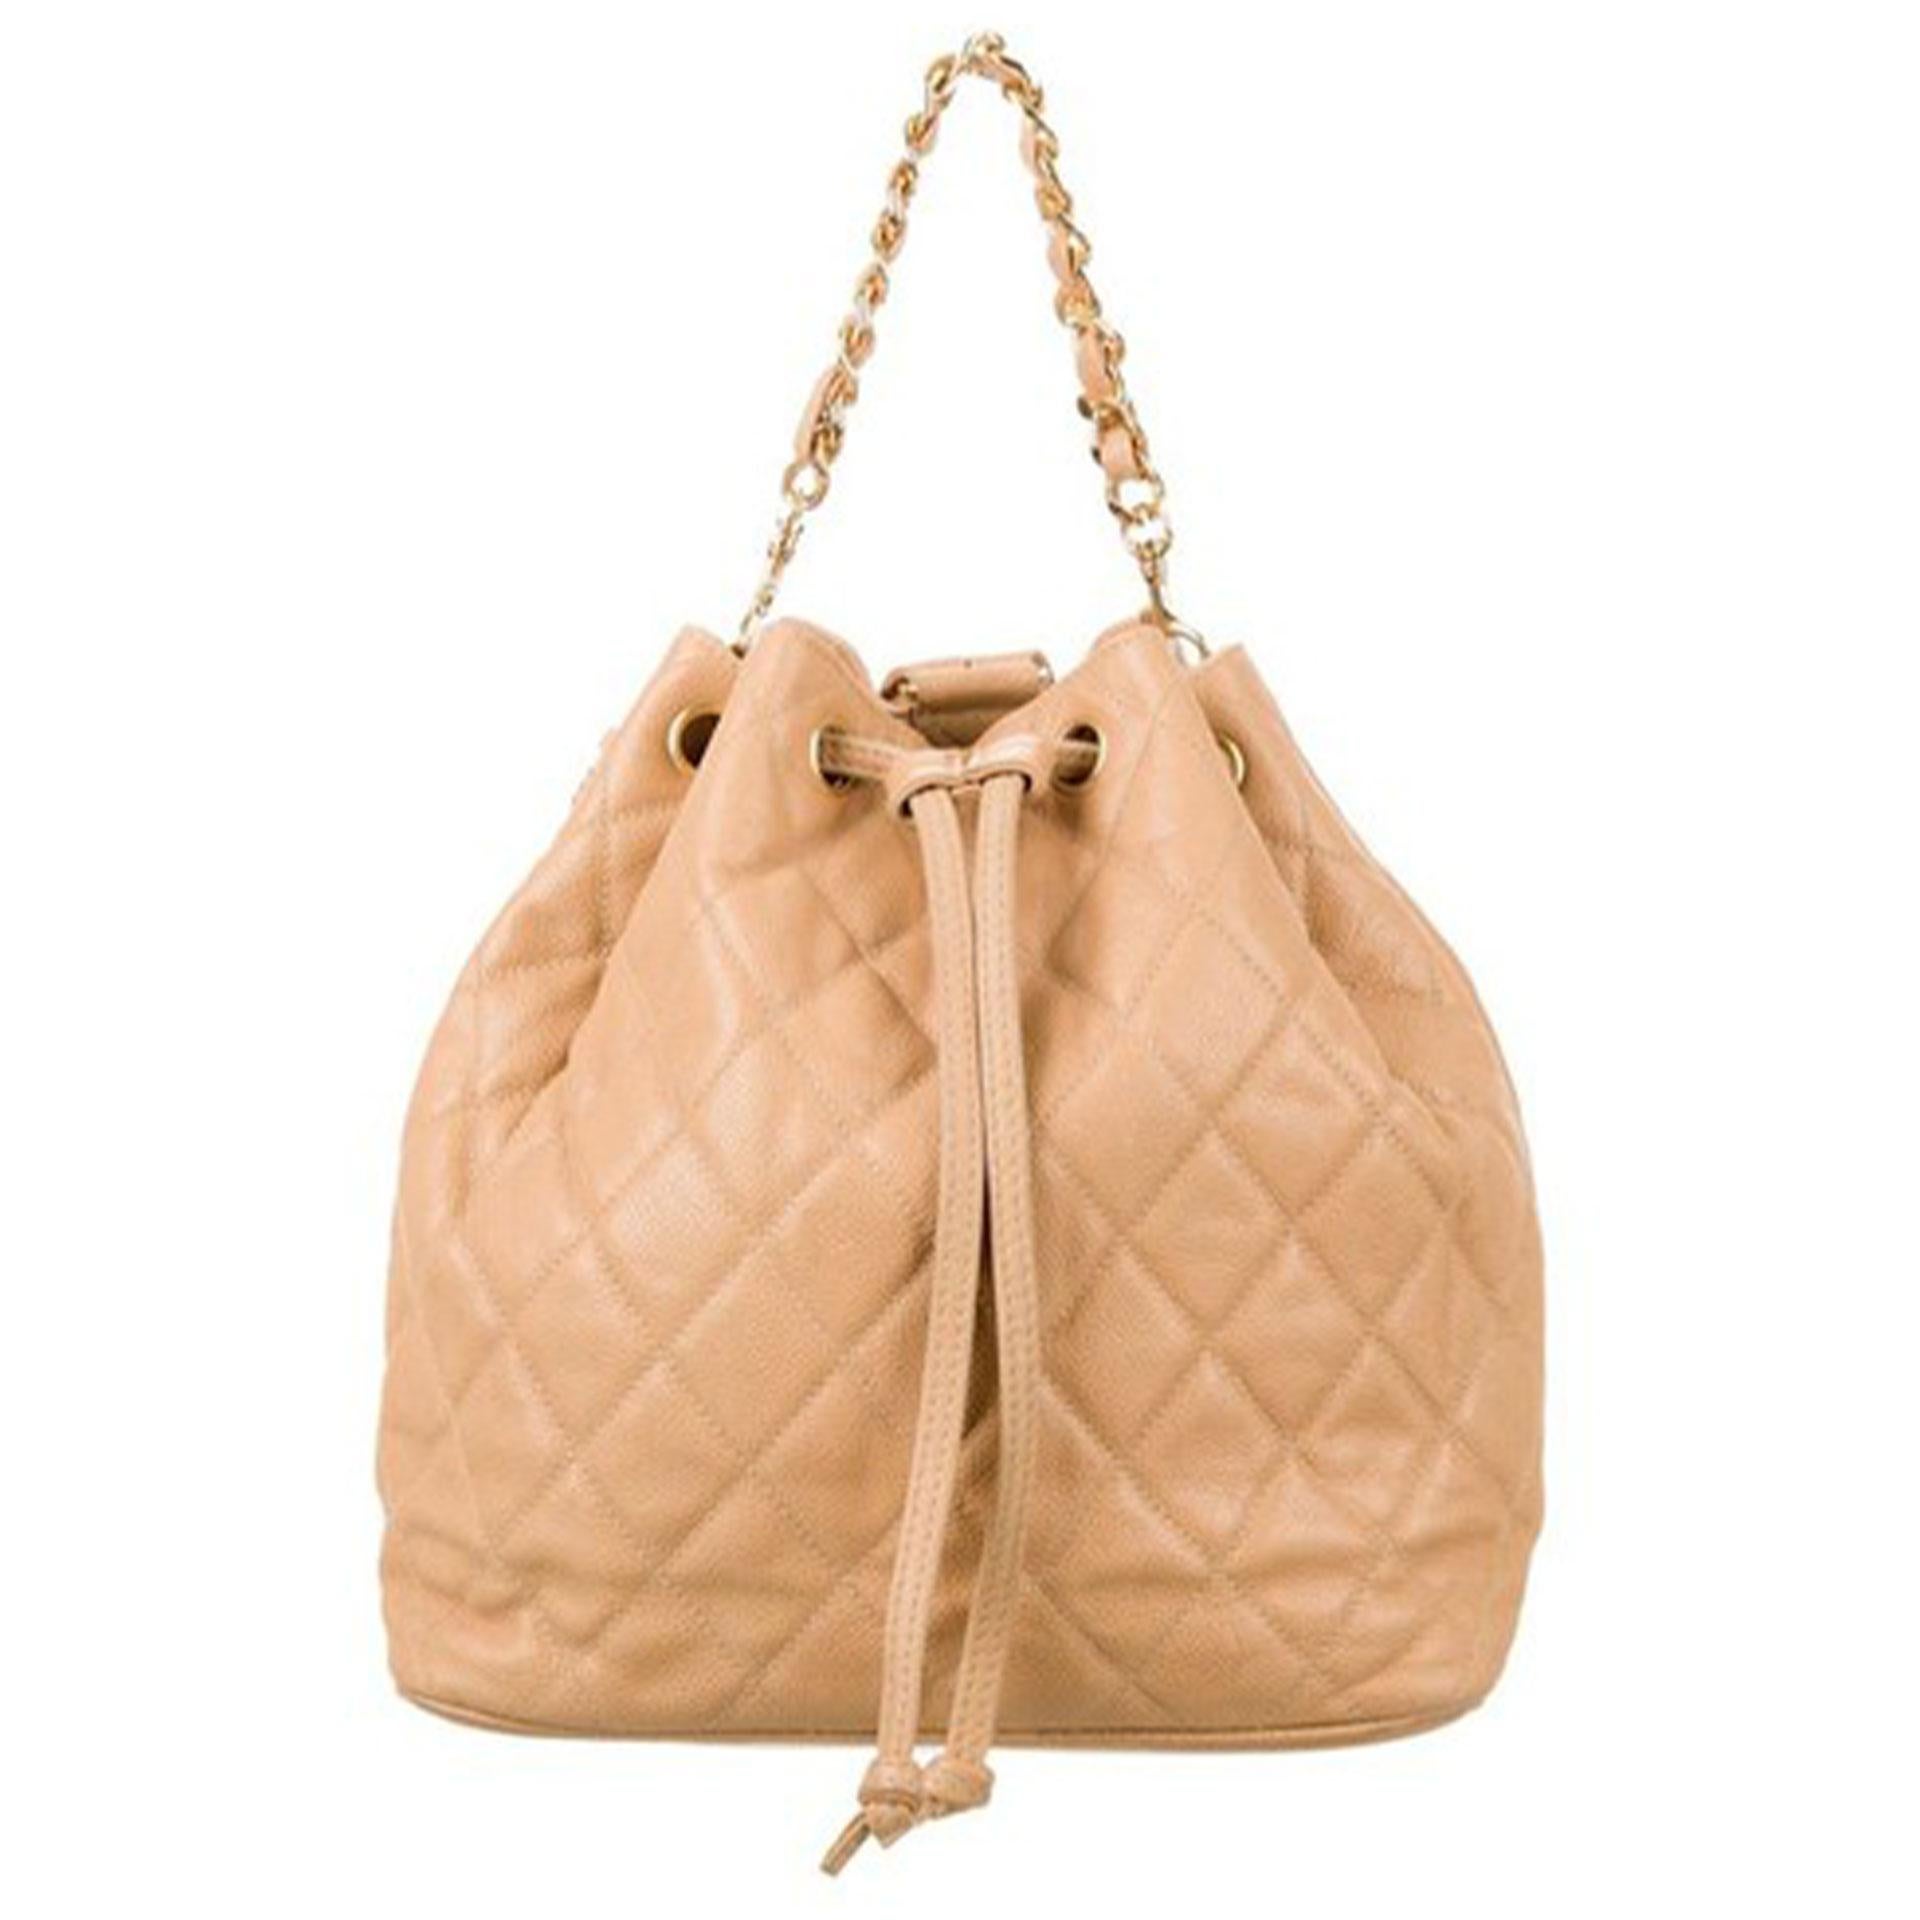 Gorgeous rare Chanel vintage beige with gold hardware rare caviar backpack.  A very classic piece from the 90s.  In very good condition for the unique color. Has never been dyed or had its color altered.  Can be worn as a backpack or crossbody,